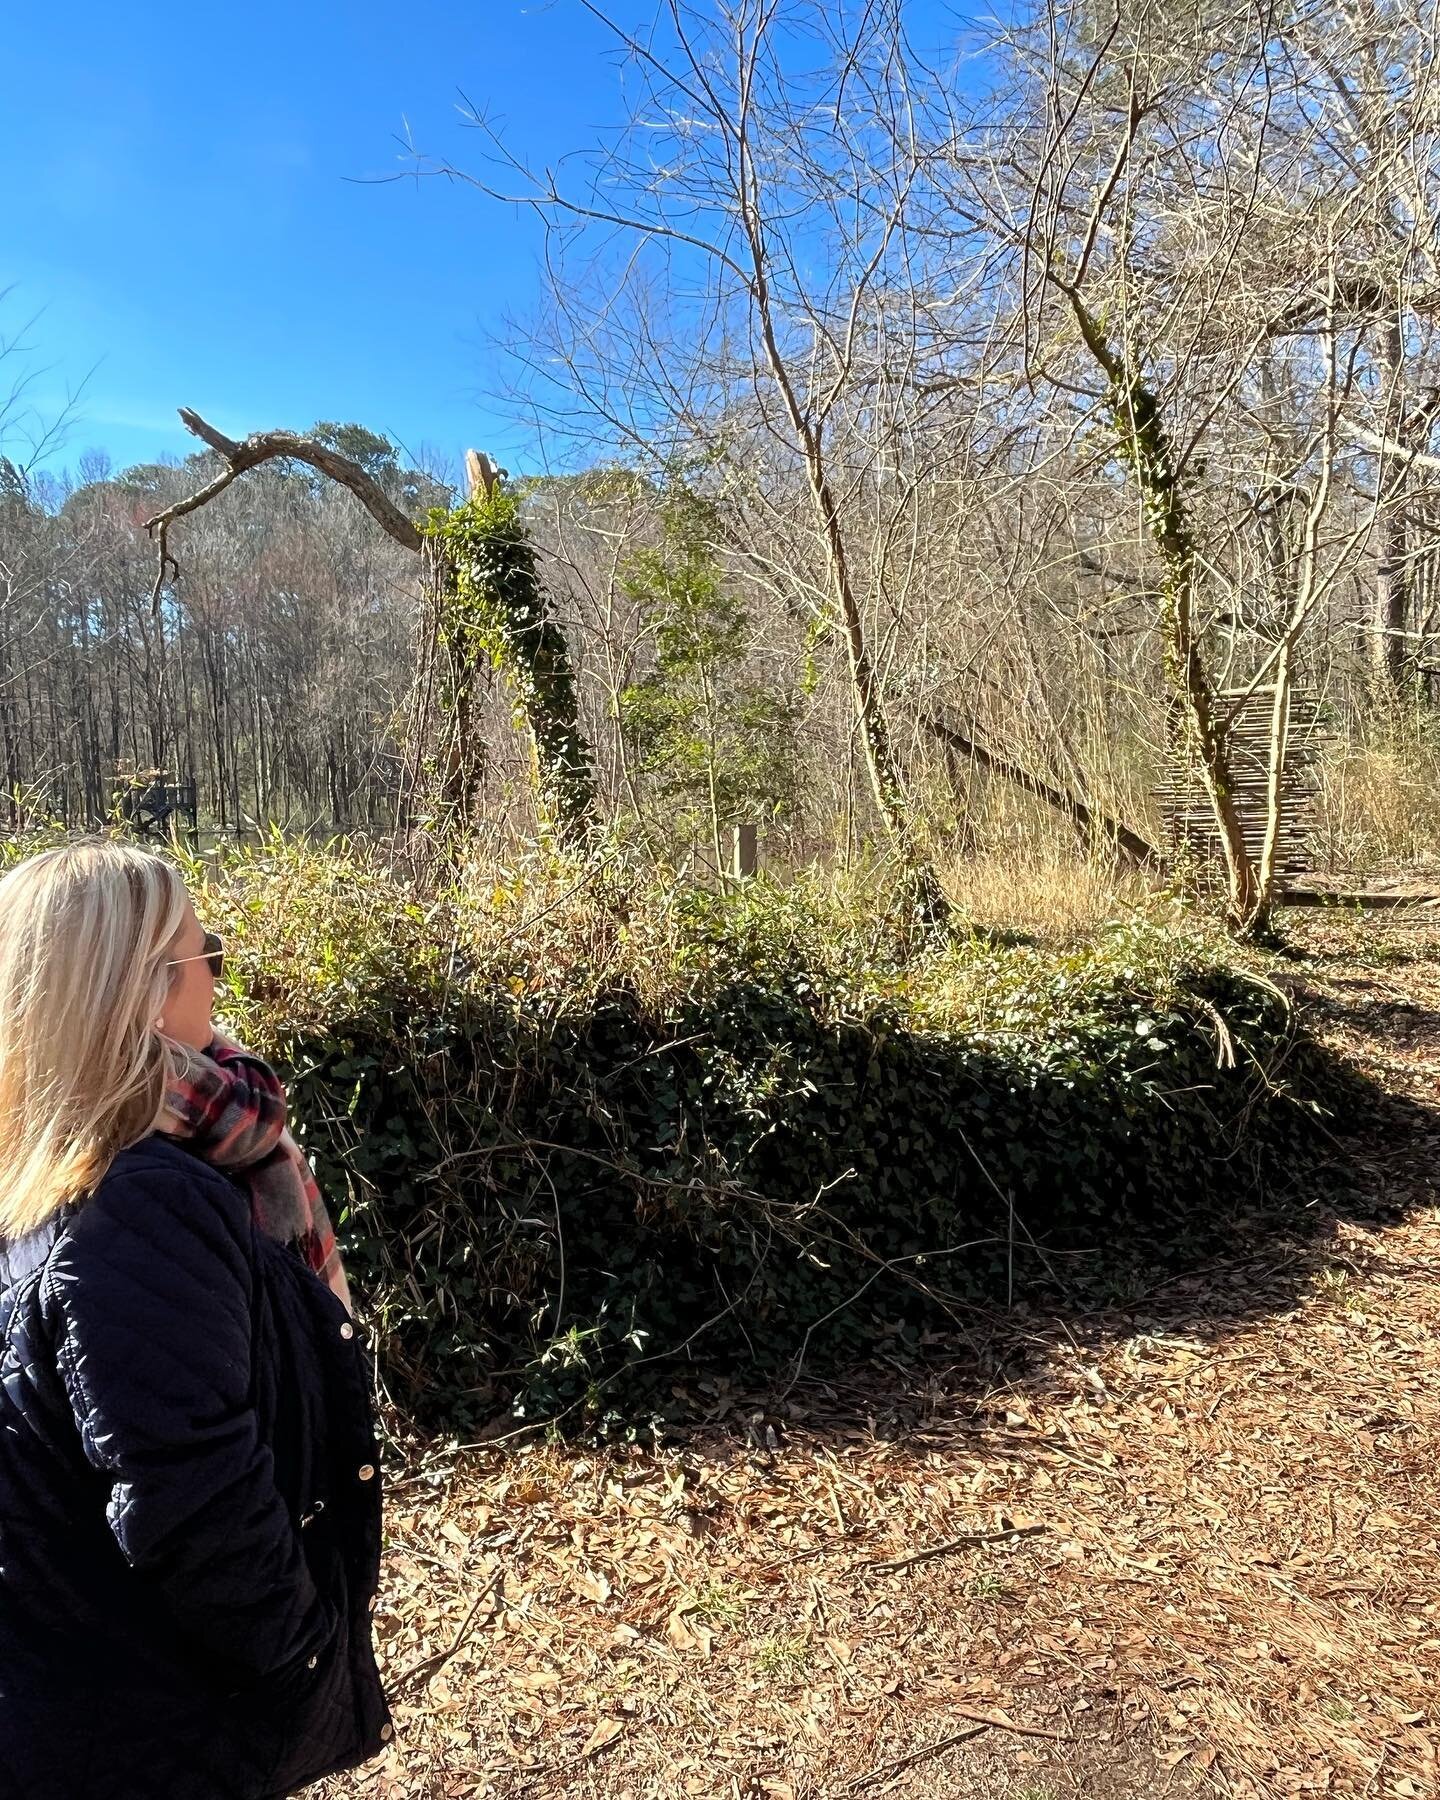 On a recent, winter Friday, Fresh Eyes-Mindful Nature Walks, explored the purpose and function of death and decay in nature. We mindfully walked as we explored how decay in trees makes room for new inhabitants, each which feed off the other,including